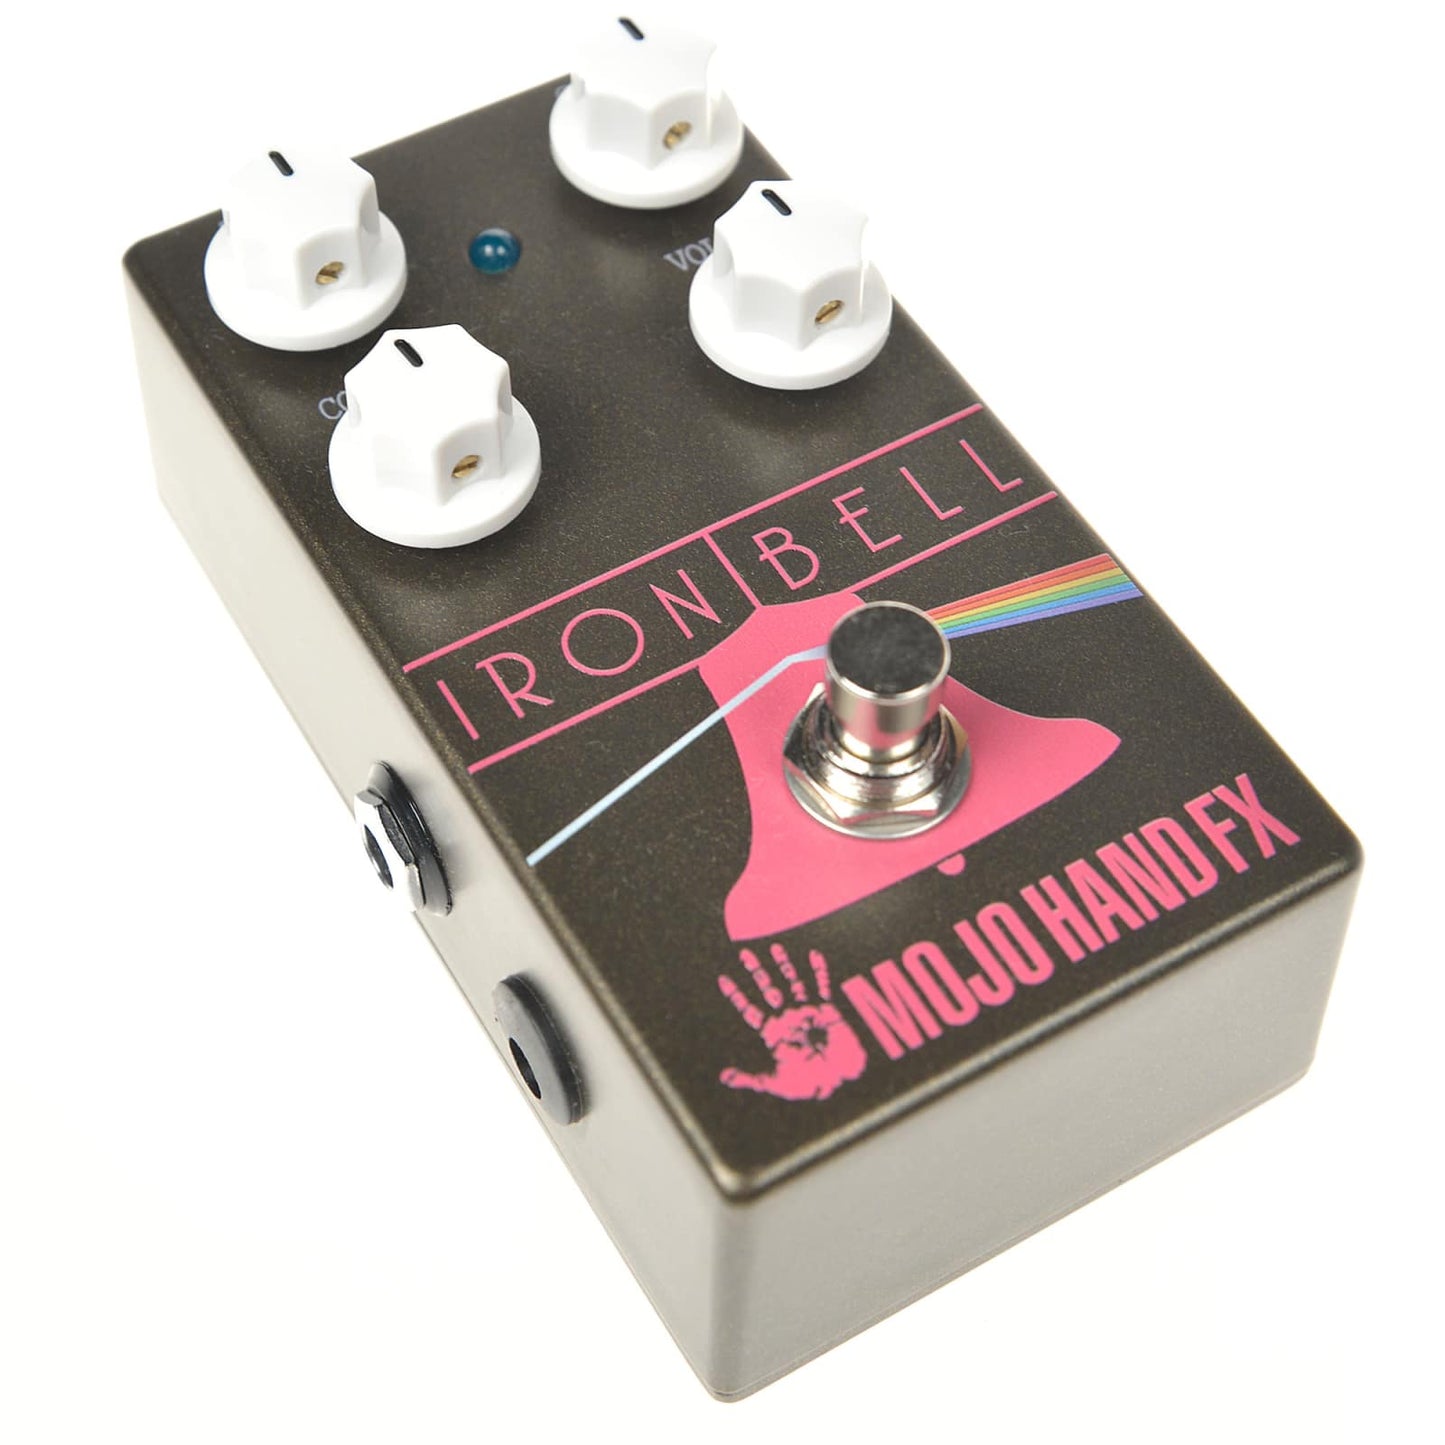 Mojo Hand FX Iron Bell Fuzz v3 Effects and Pedals / Fuzz